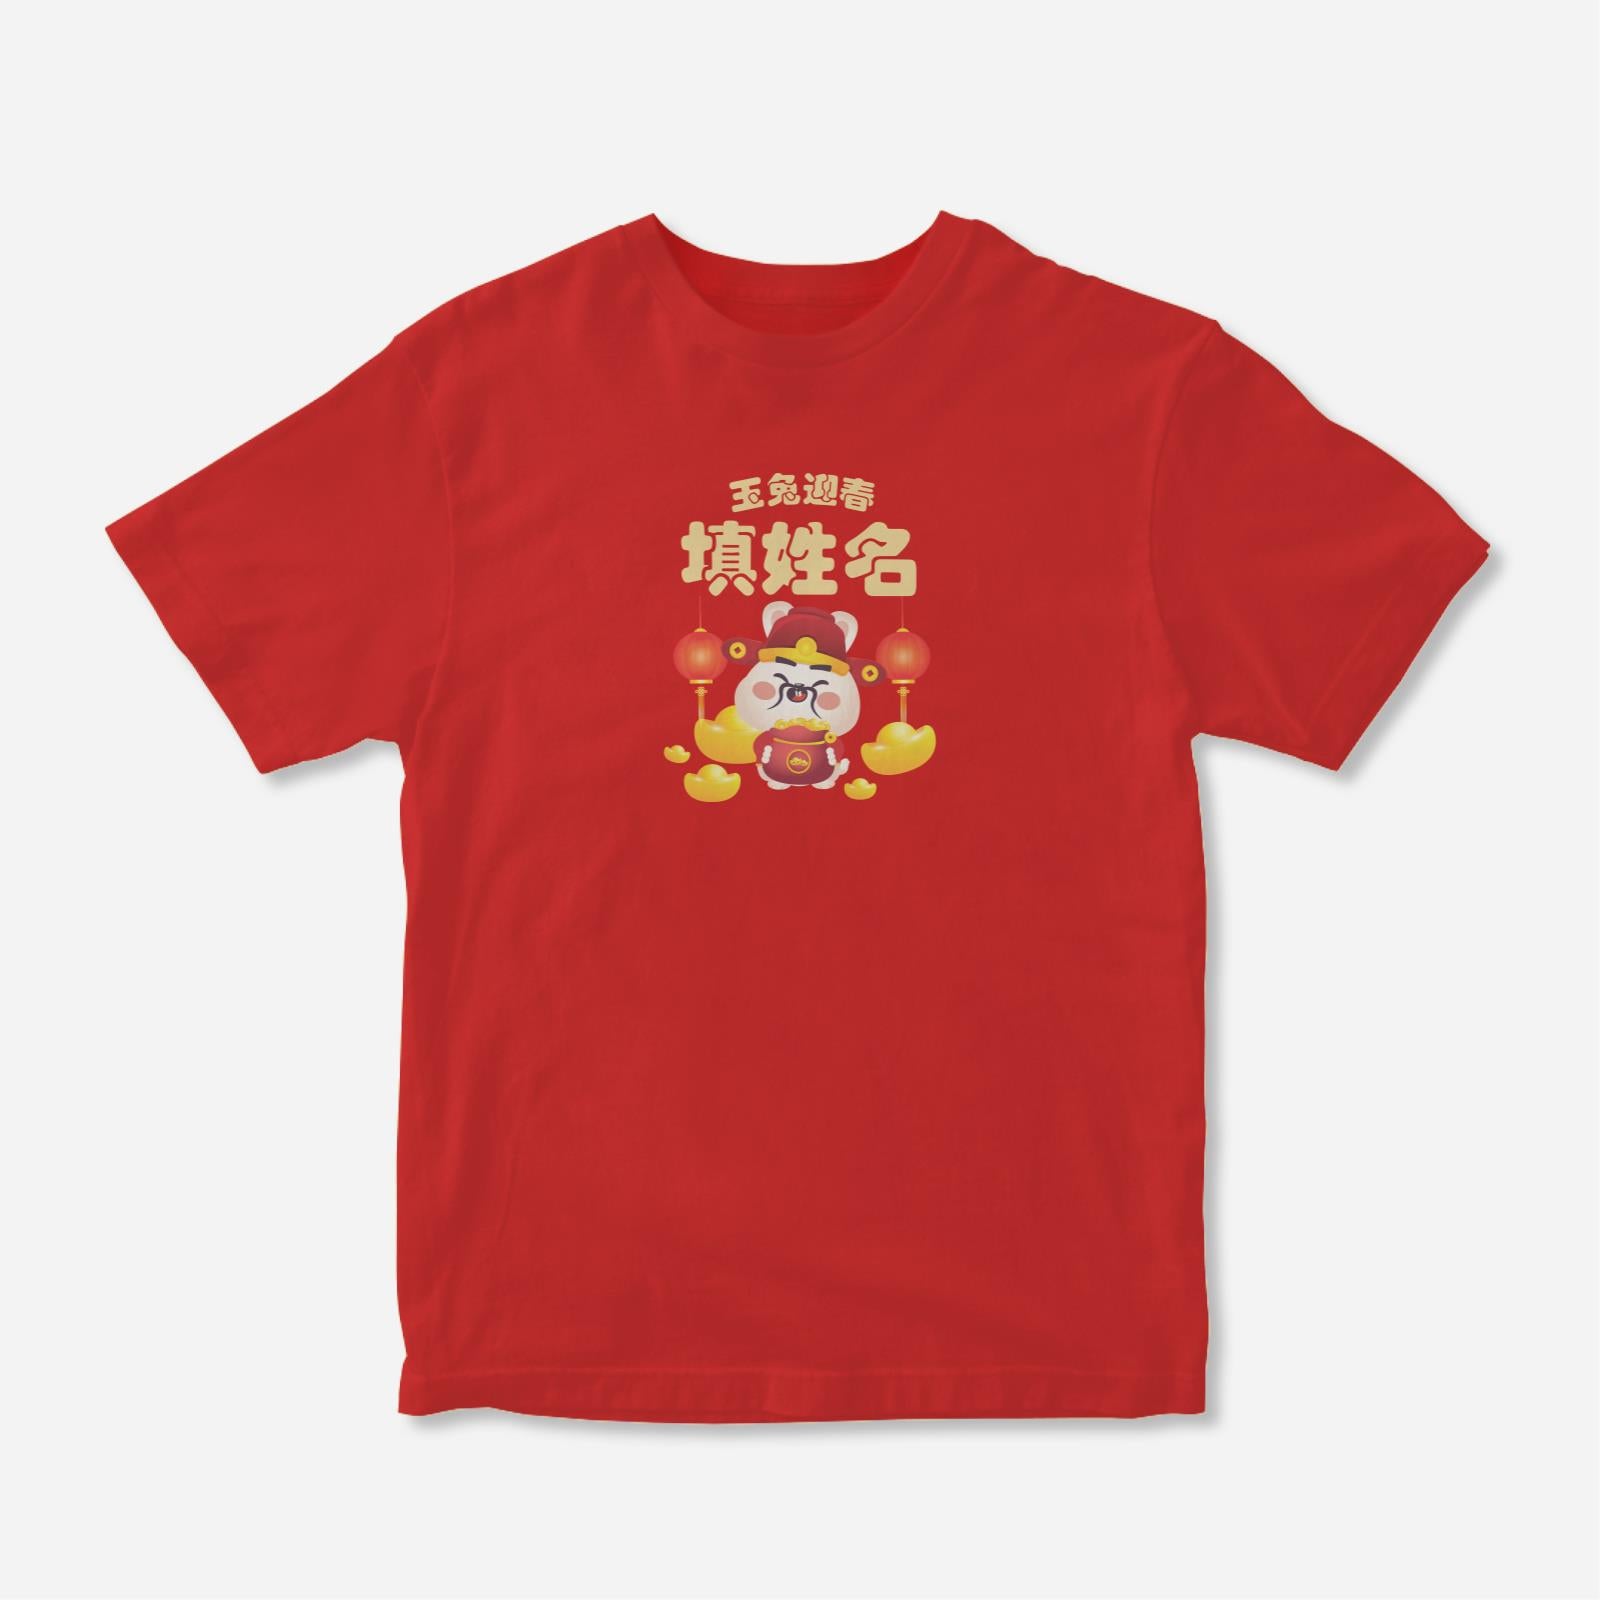 Cny Rabbit Family - Daddy Rabbit Kids Tee Shirt with Chinese Personalization